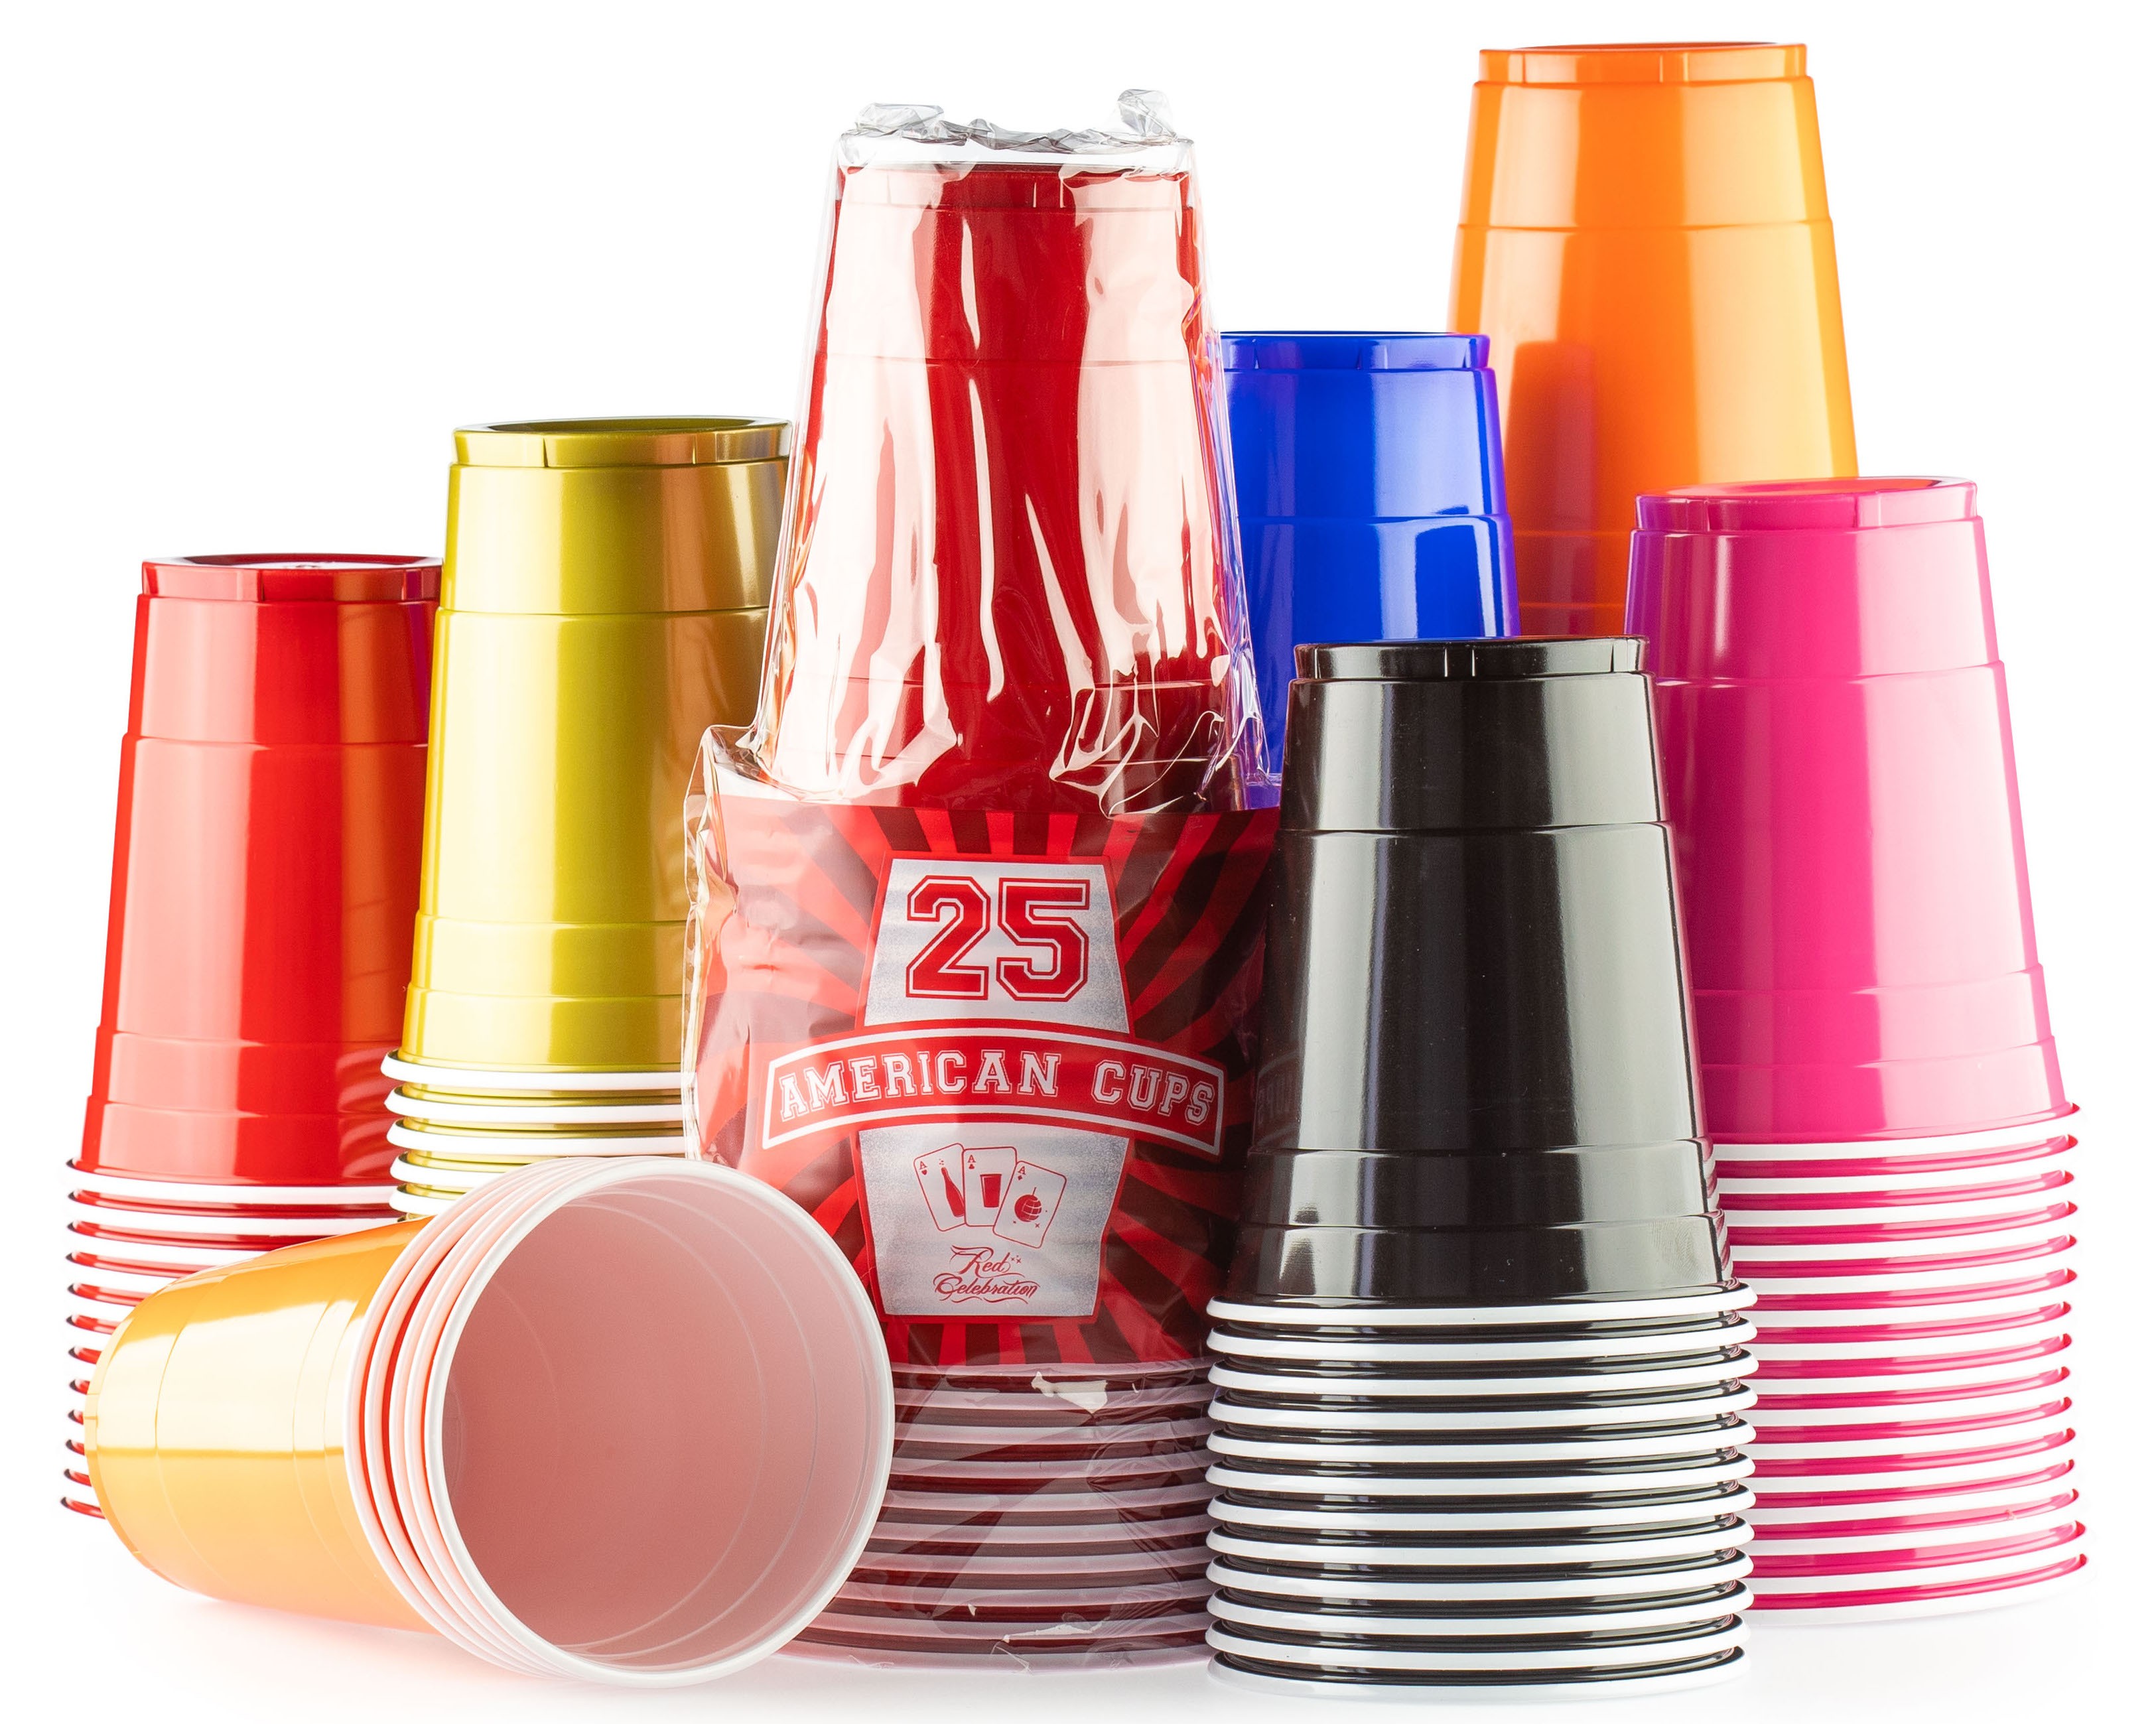 Original American Red Cups in 5 Colors! Lowest Prices!